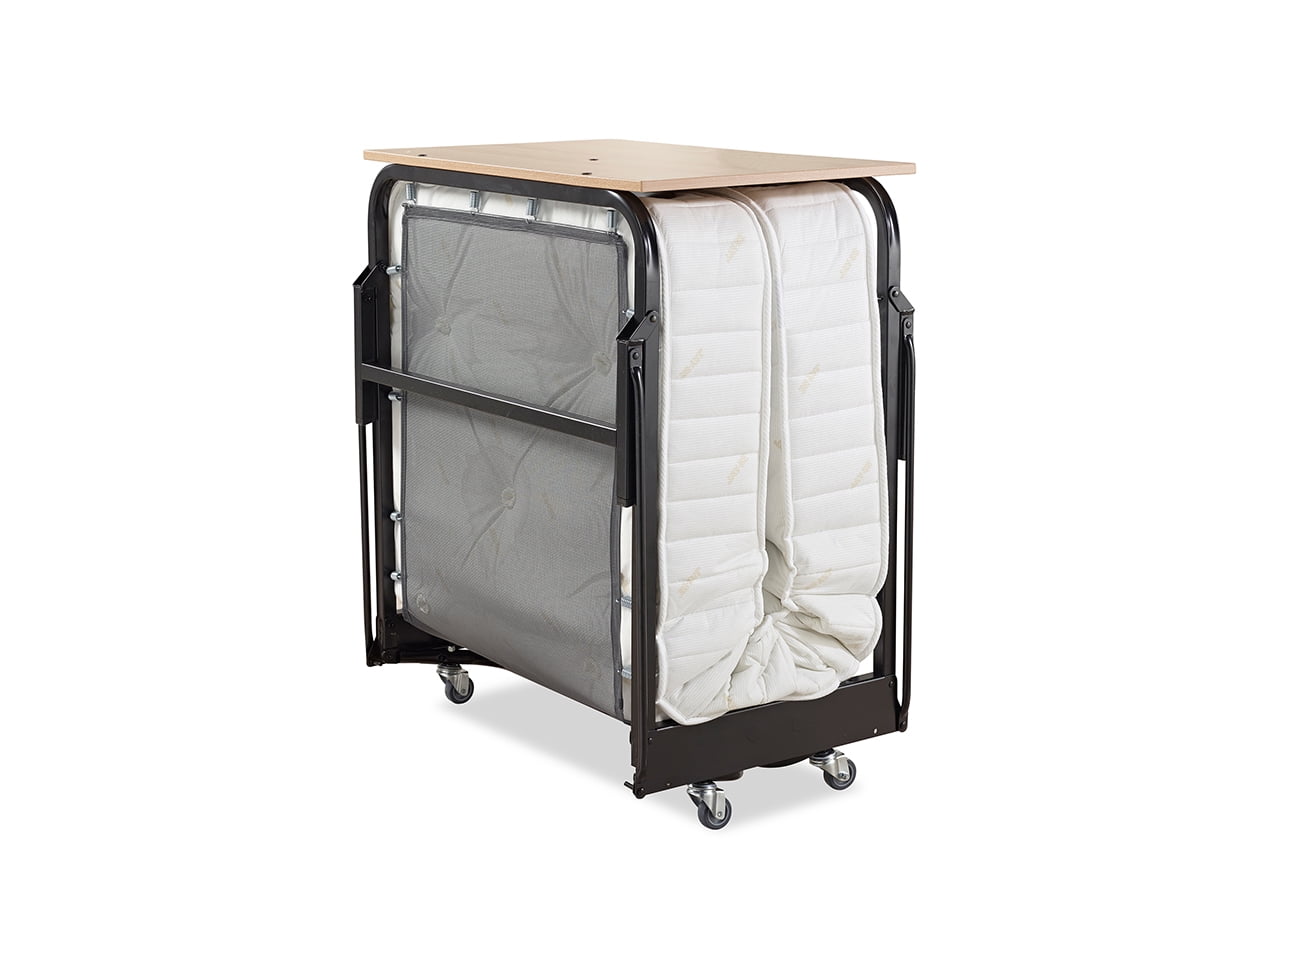 hospitality folding bed with mattress